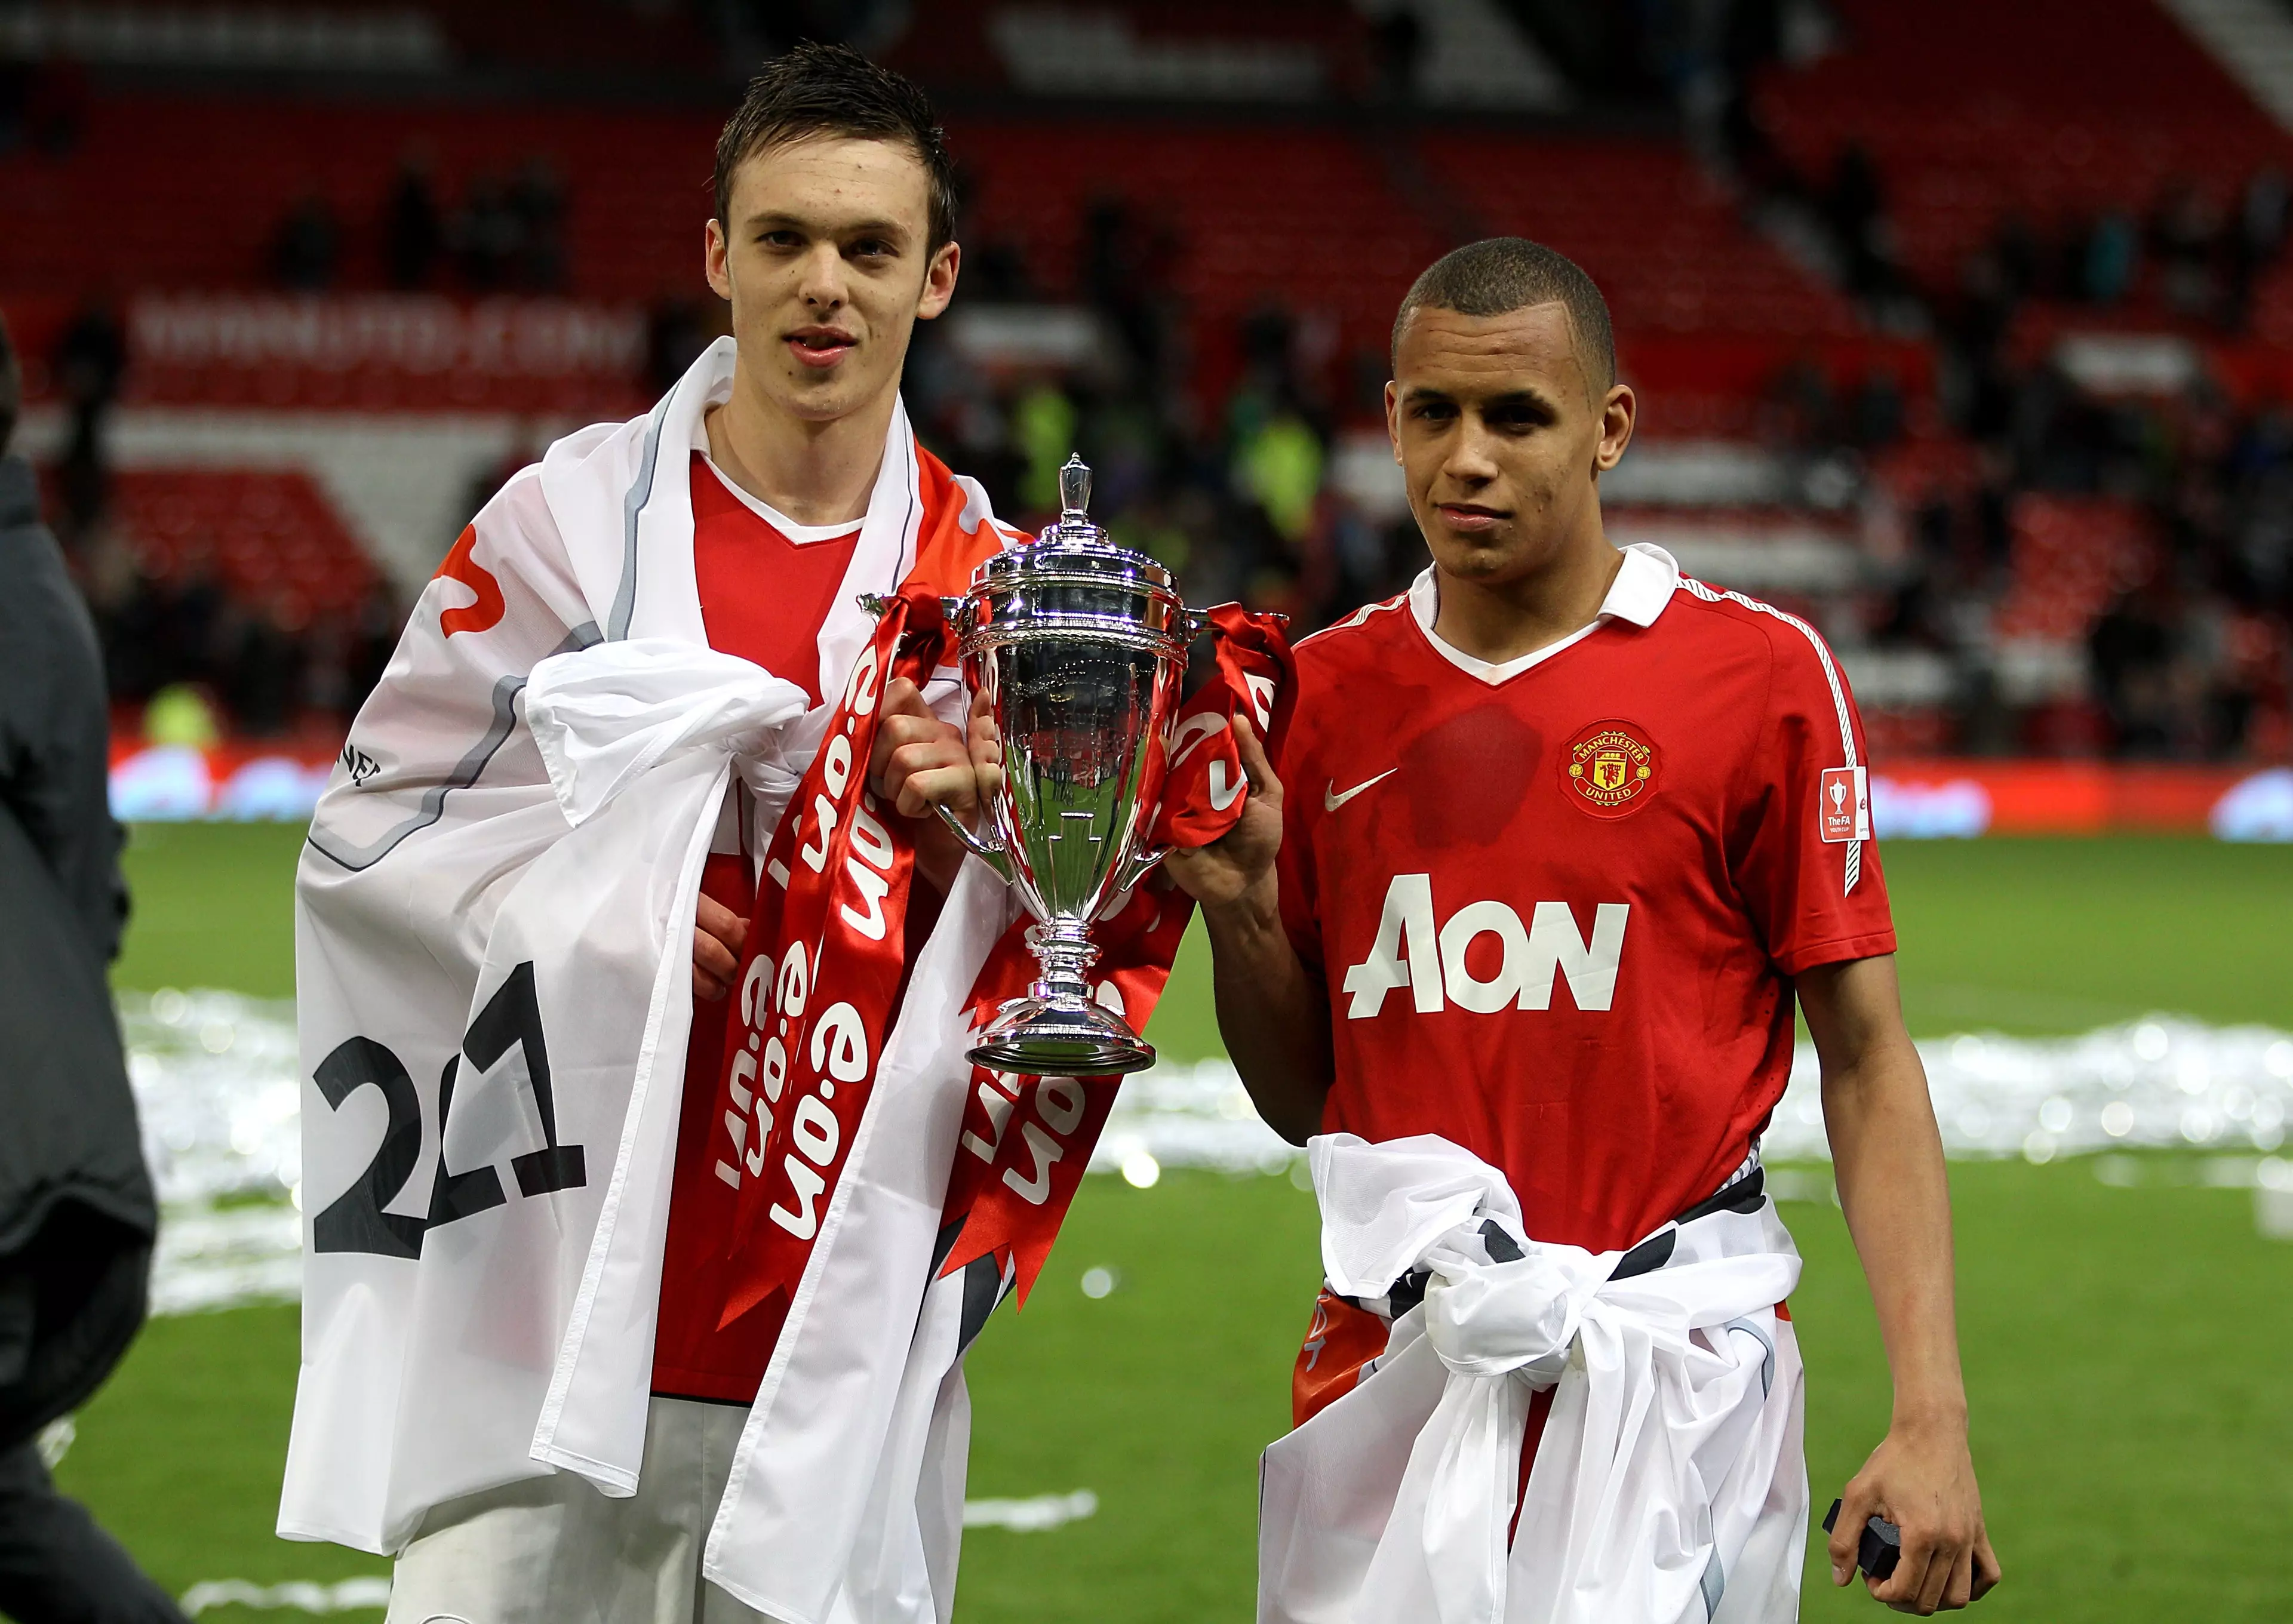 Morrison won the FA Youth Cup at Old Trafford. Image: PA Images